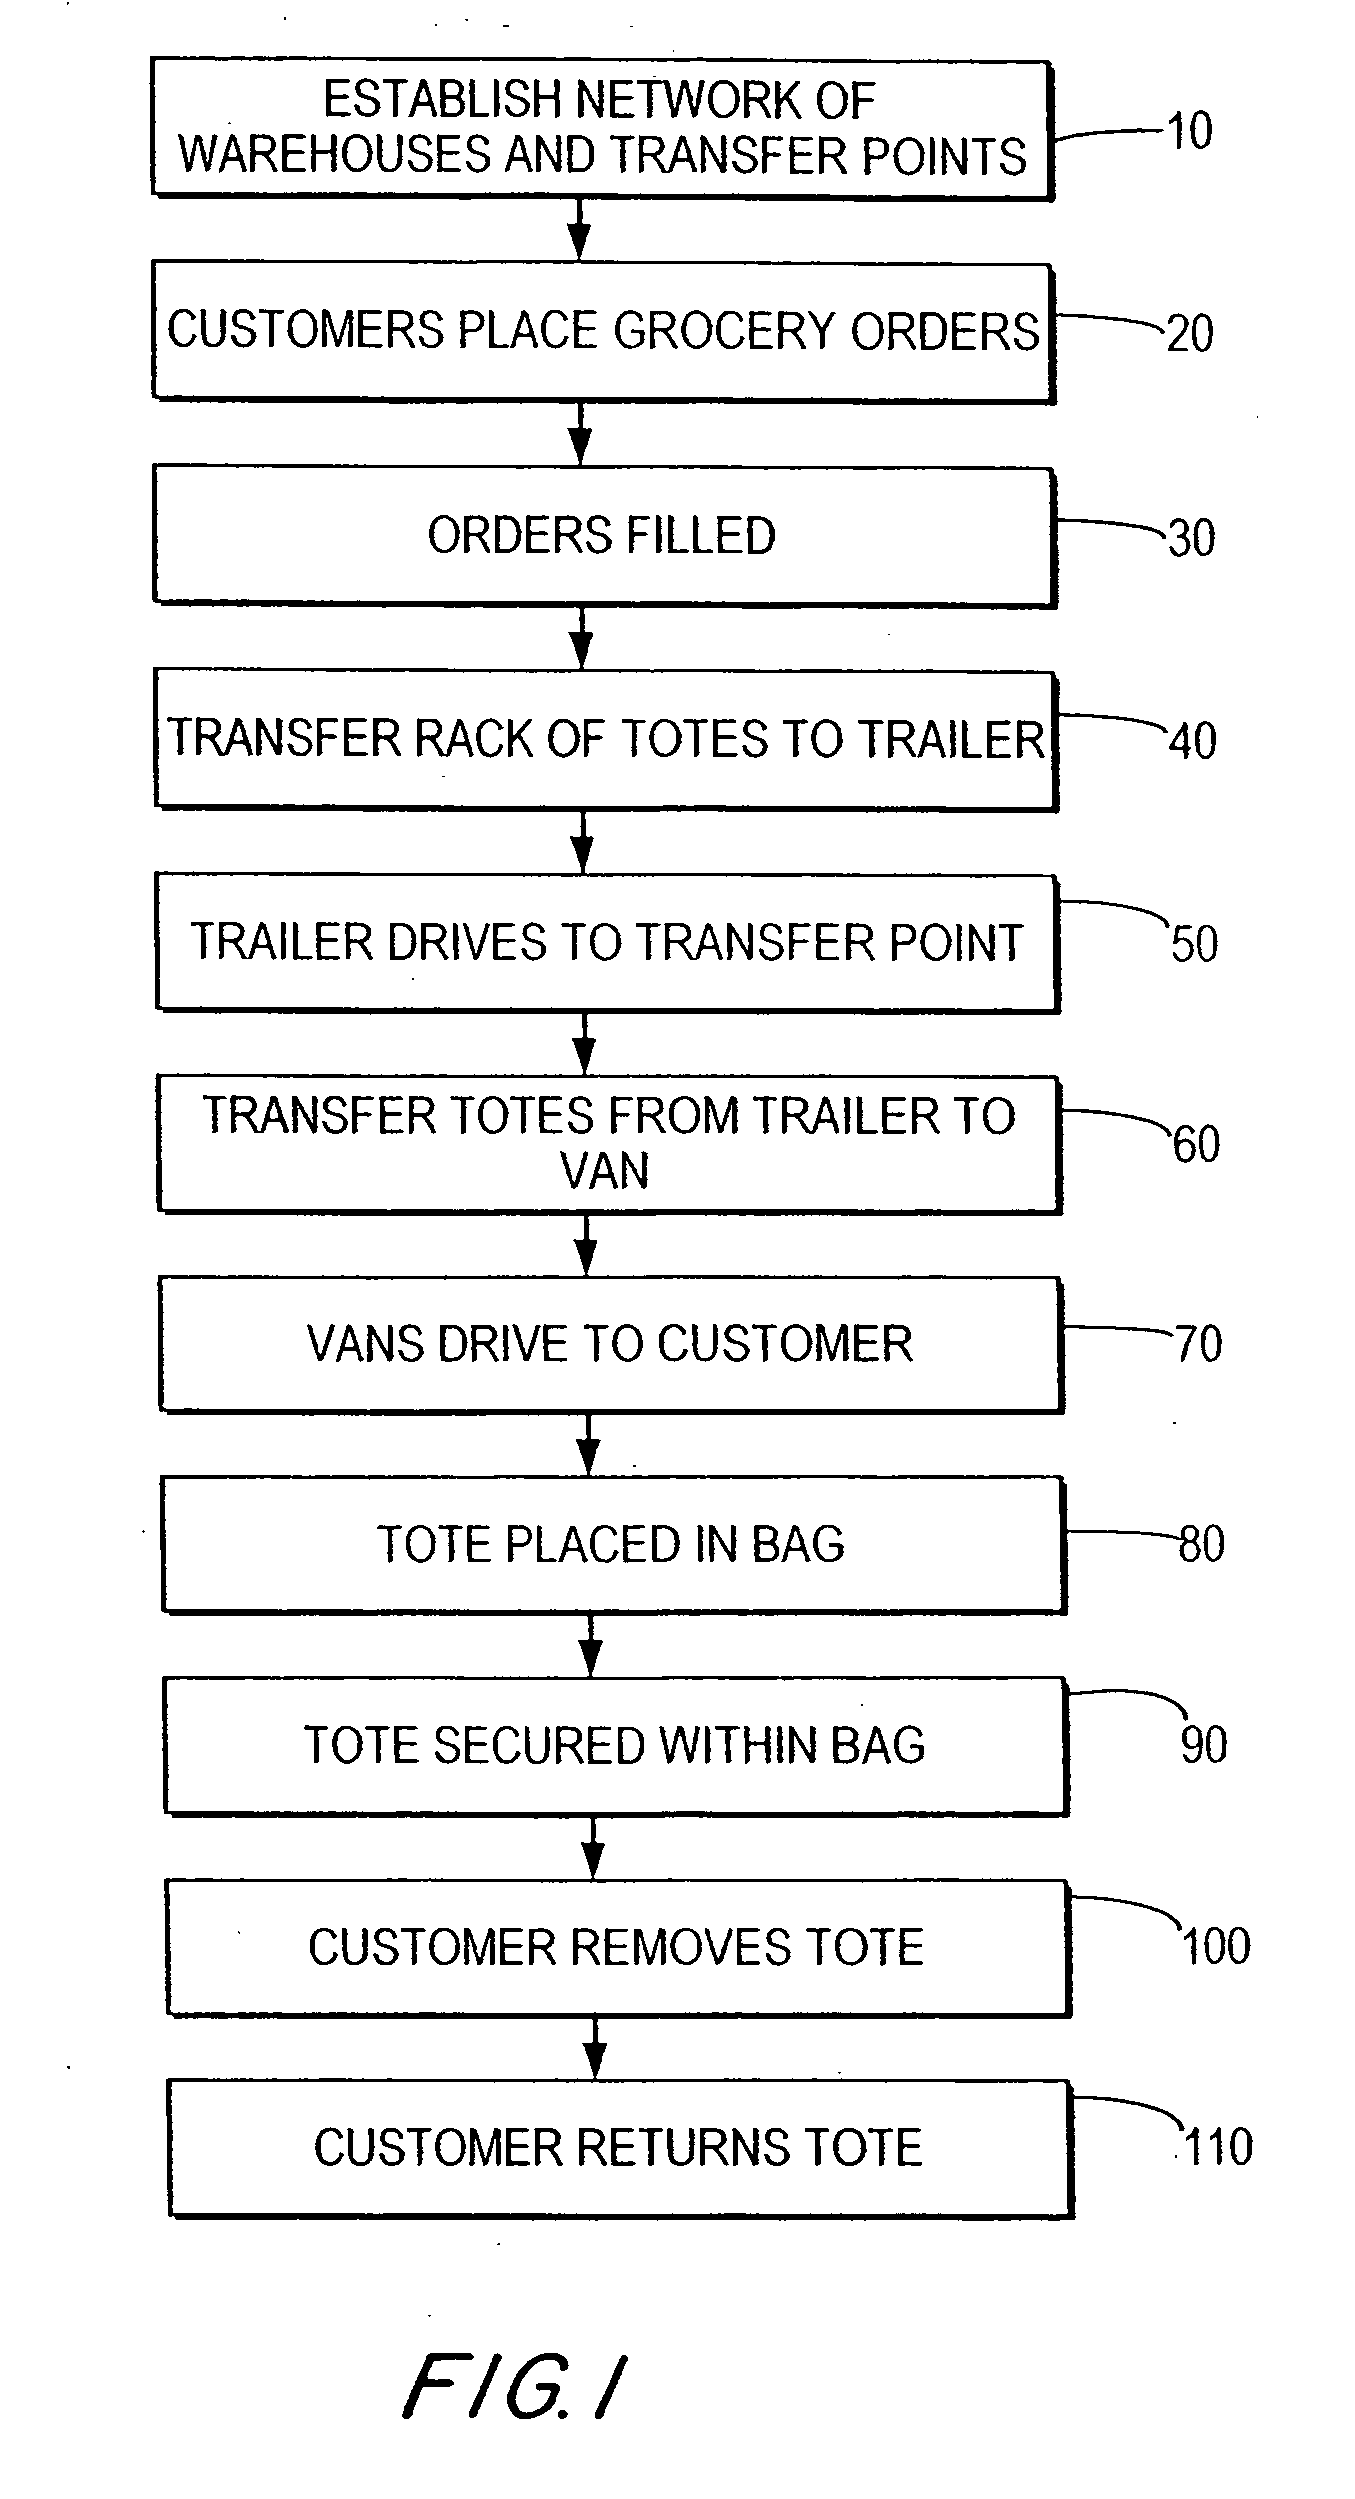 System and method of delivering groceries purchased over the internet